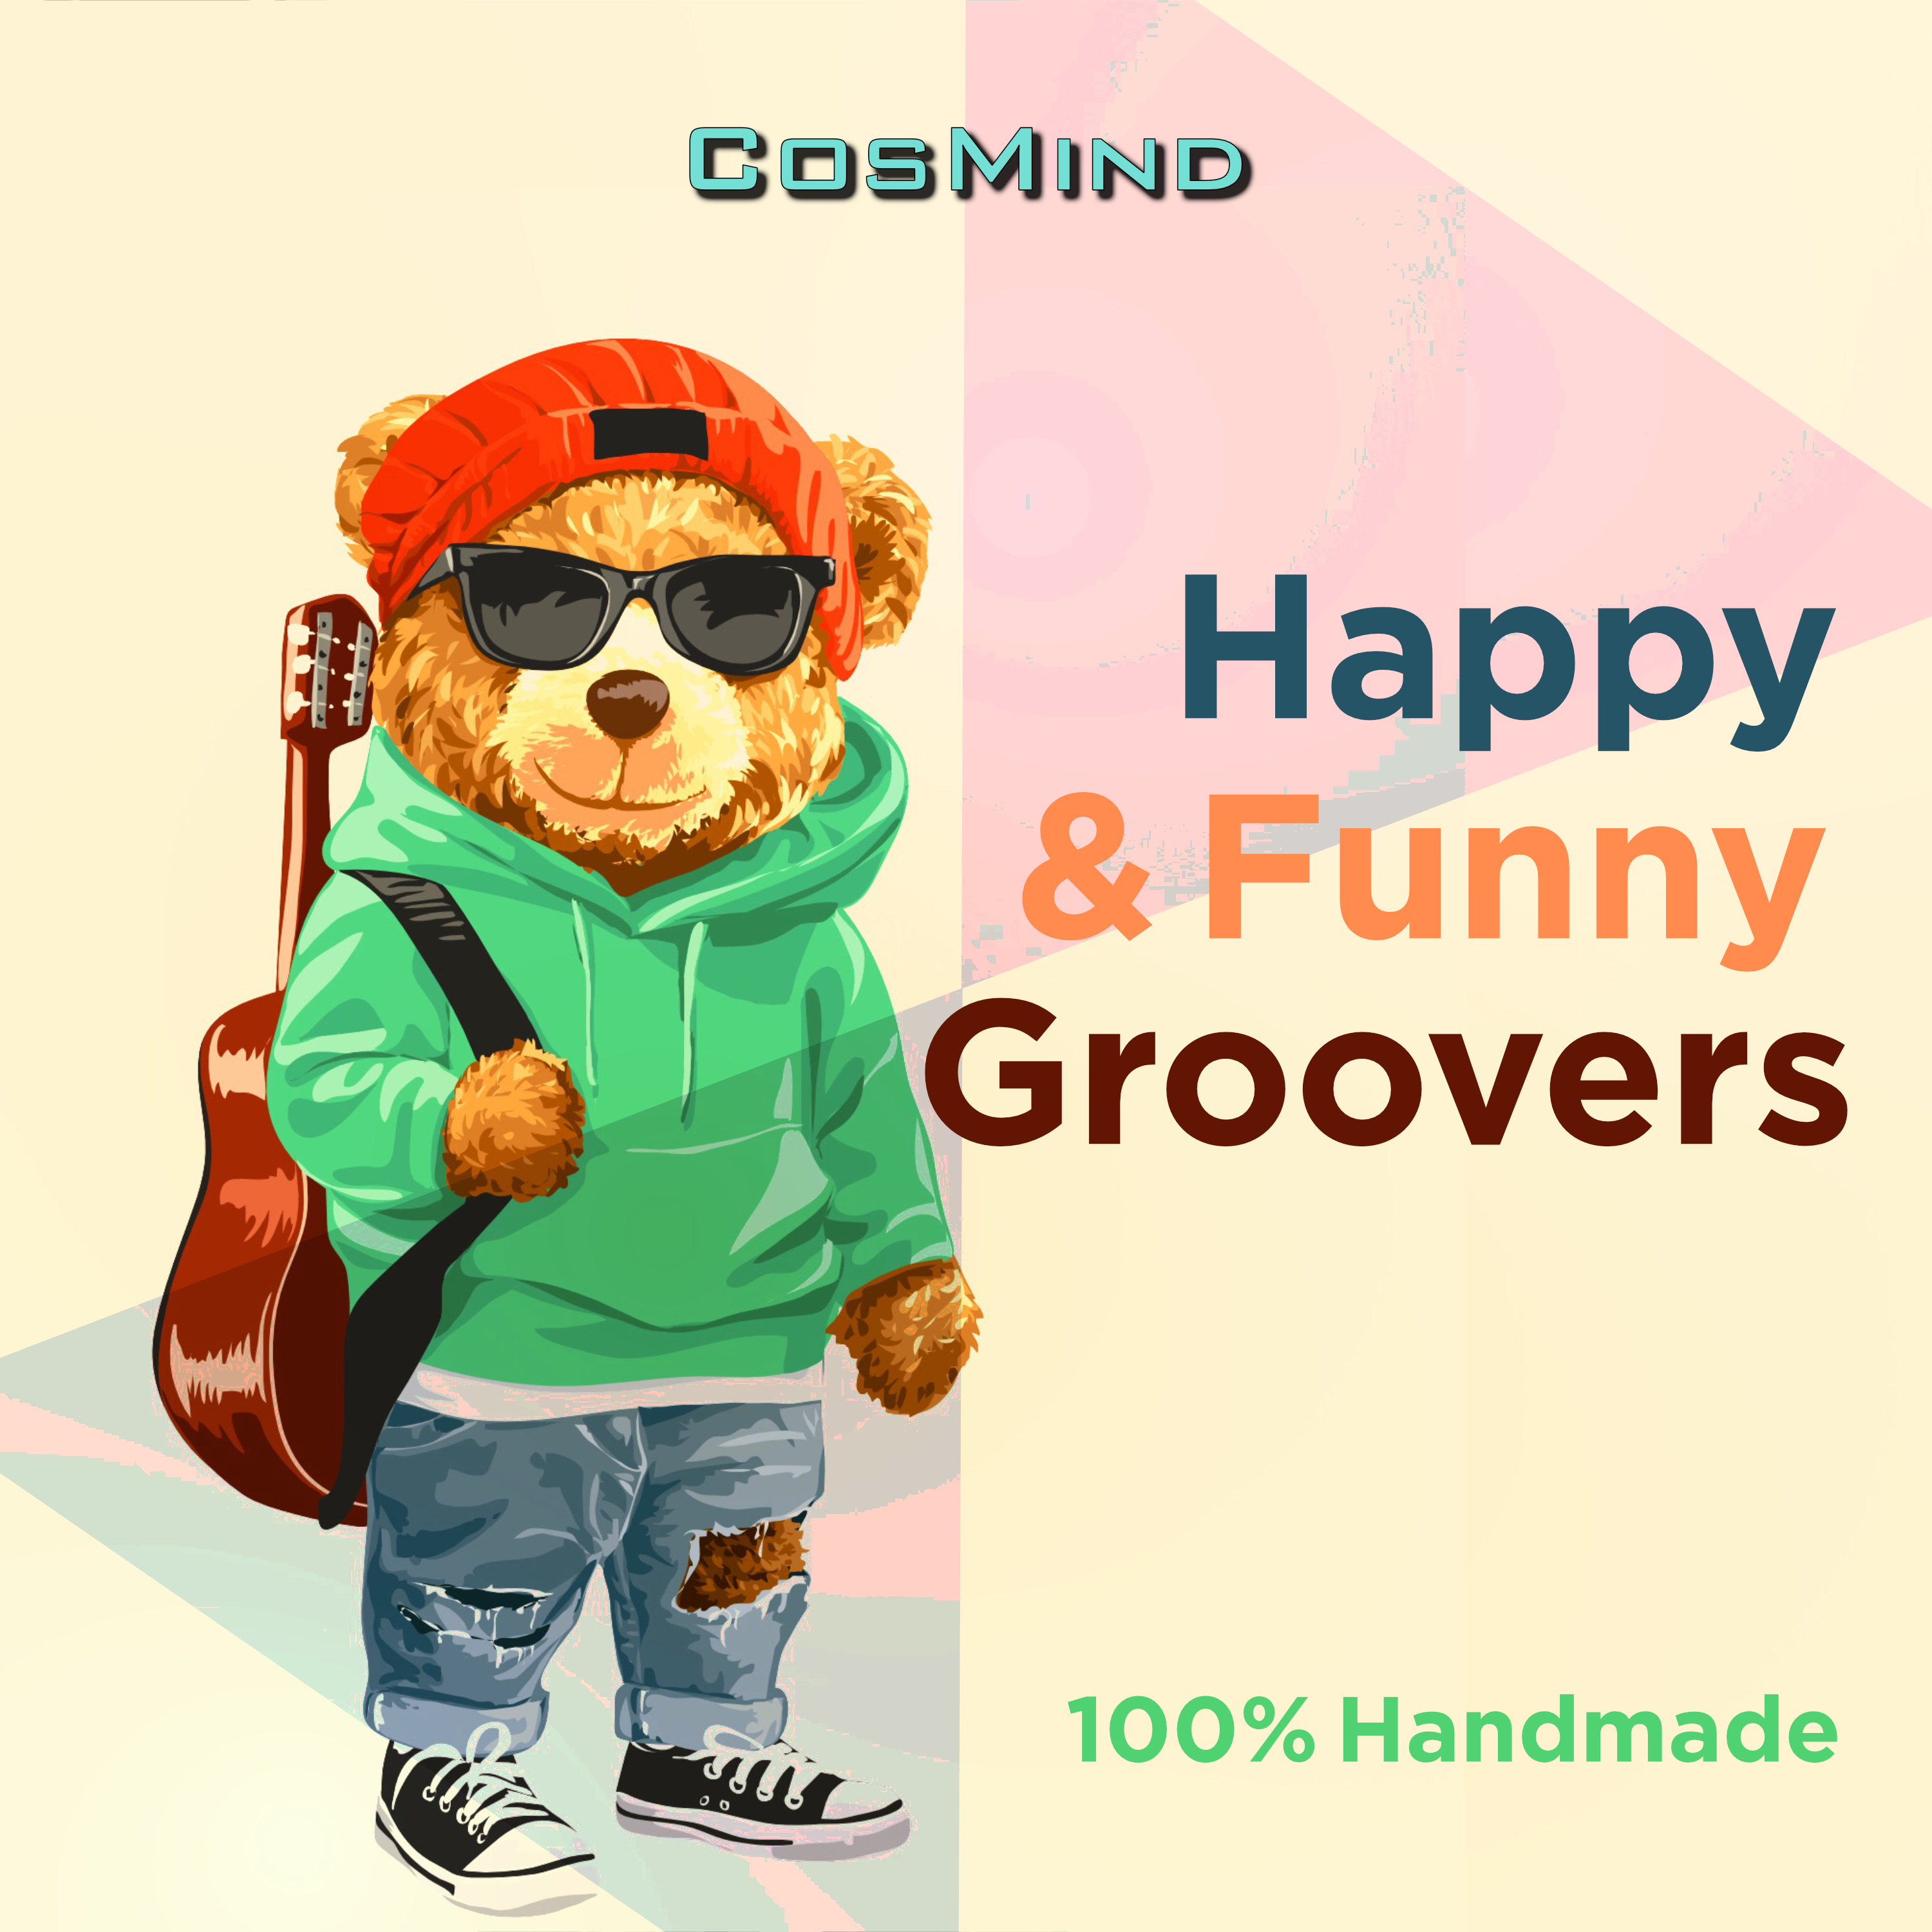 Happy & Funny Groovers